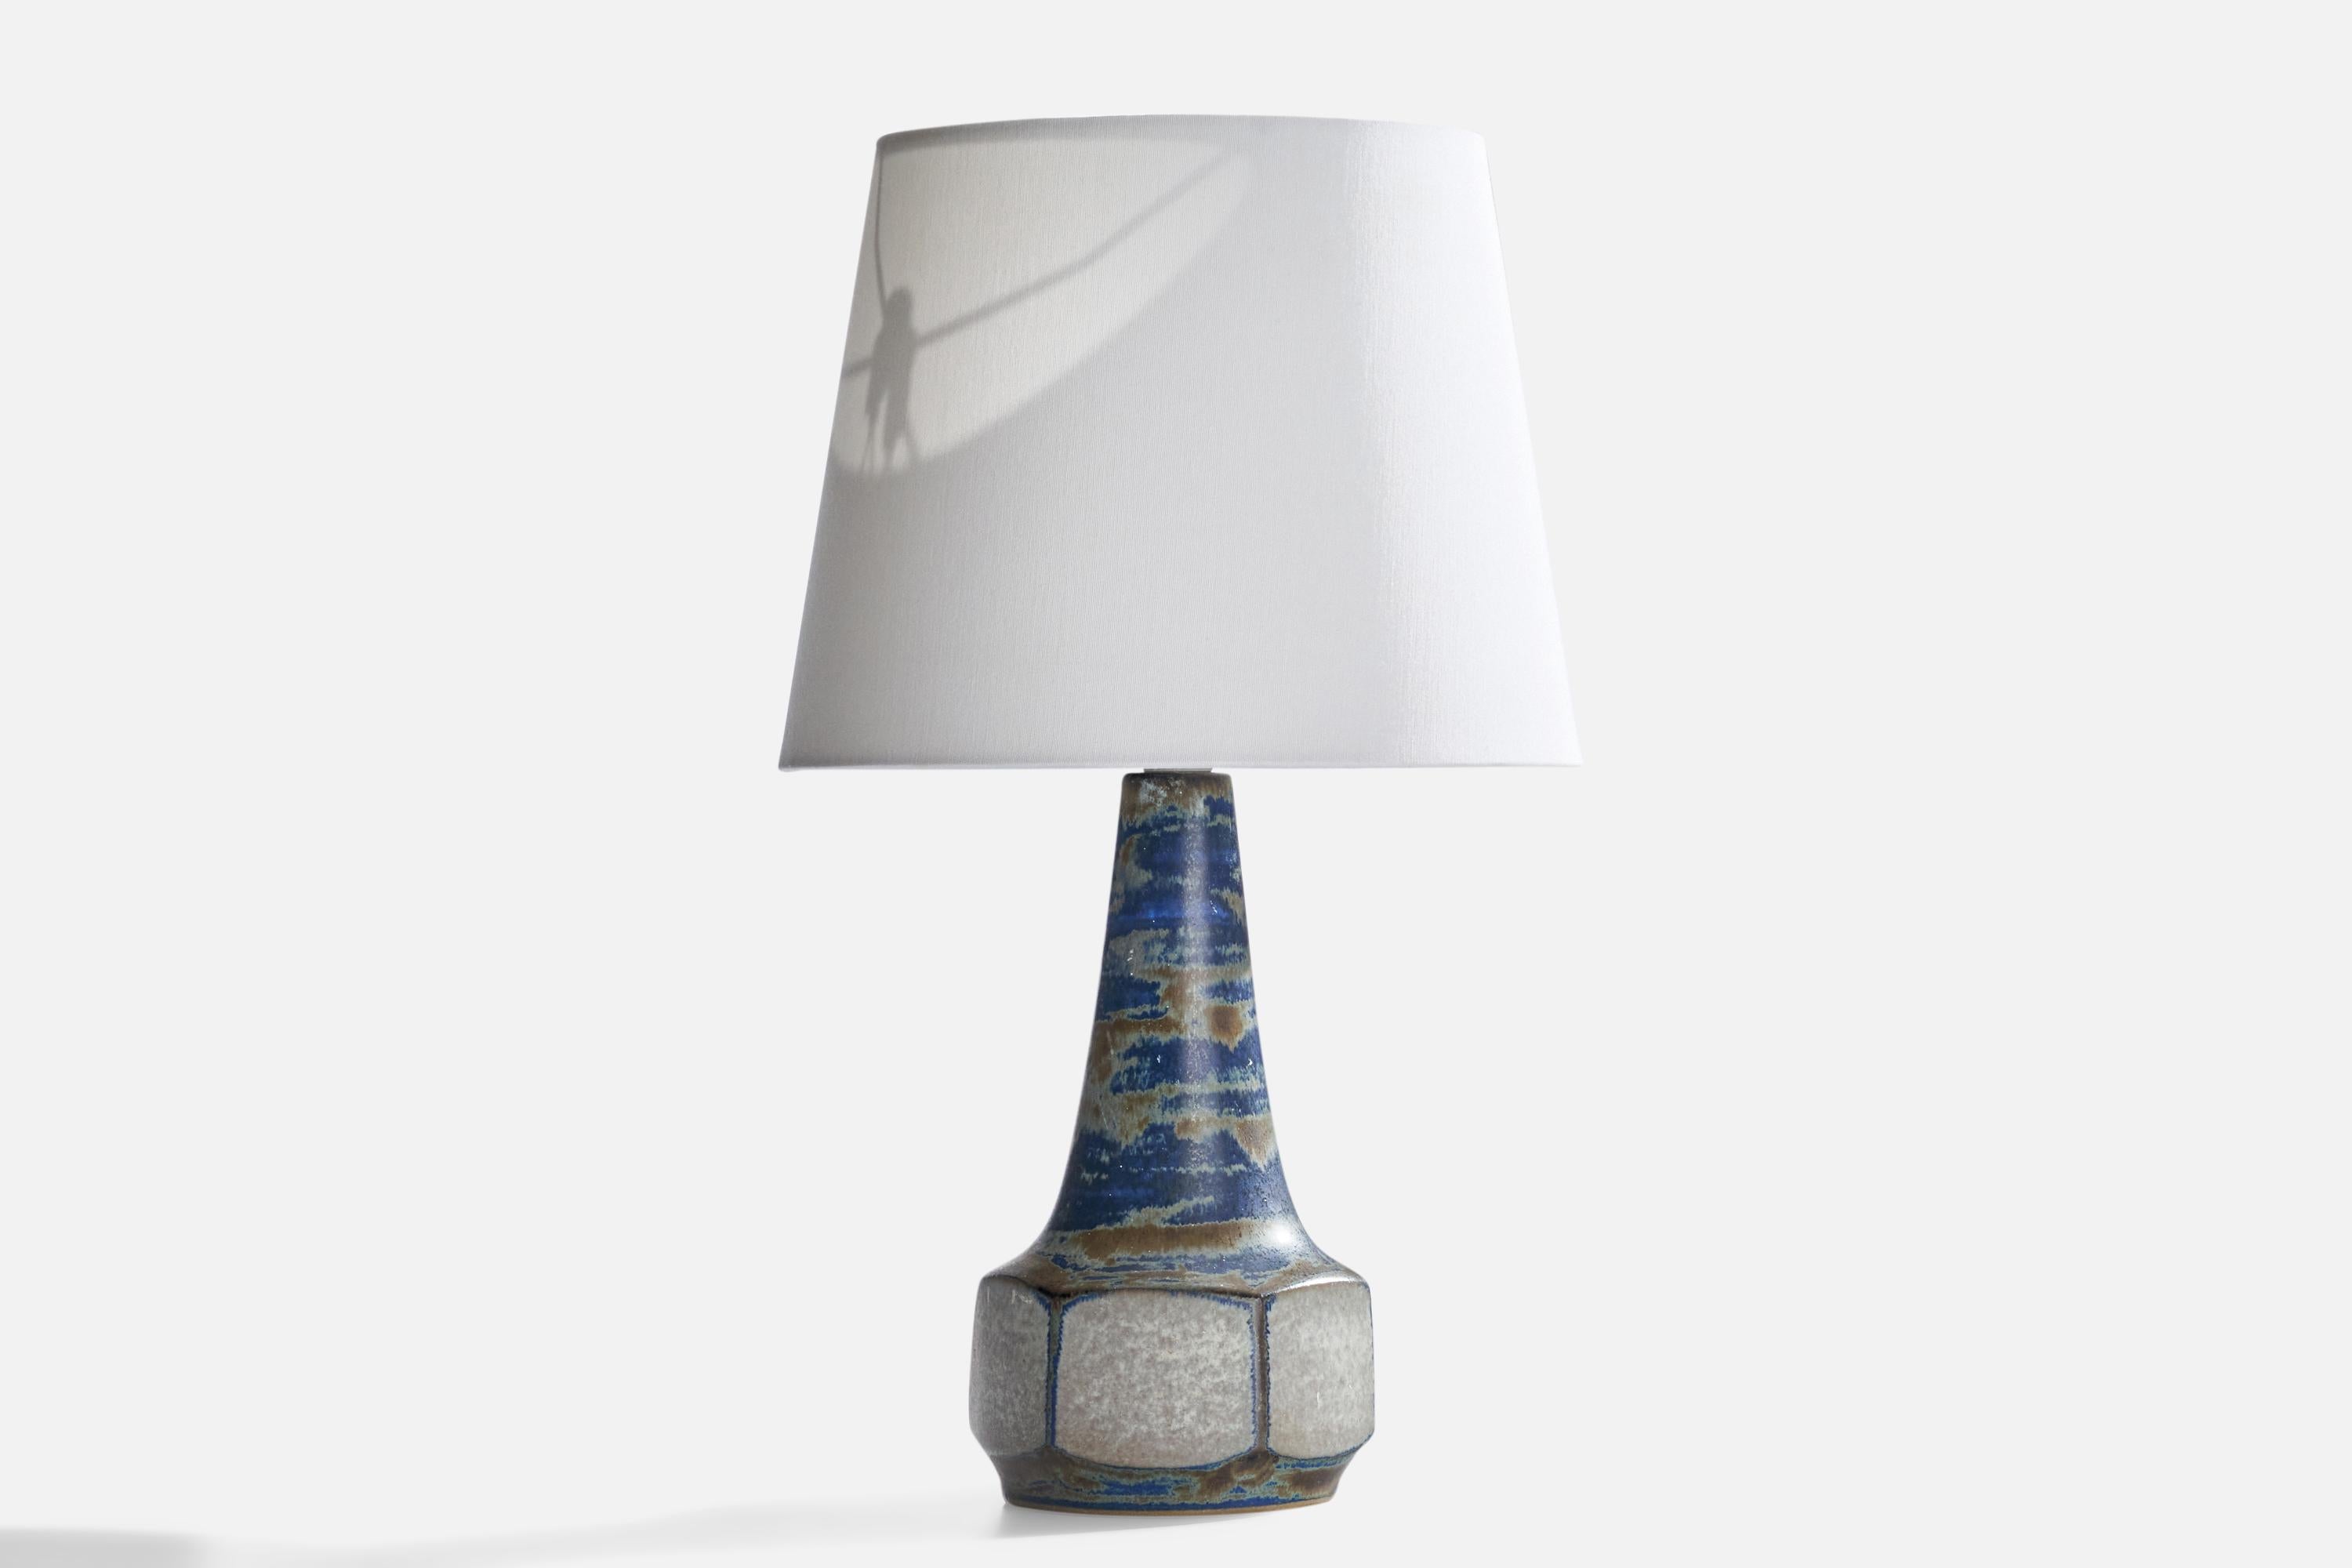 A blue-glazed stoneware table lamp designed by Marianne Starck and produced by Michael Andersen, Bornholm, Denmark, 1960s.

Dimensions of Lamp (inches): 11.25” H x 5” Diameter
Dimensions of Shade (inches): 4” Top Diameter x 10”  Bottom Diameter x 8”